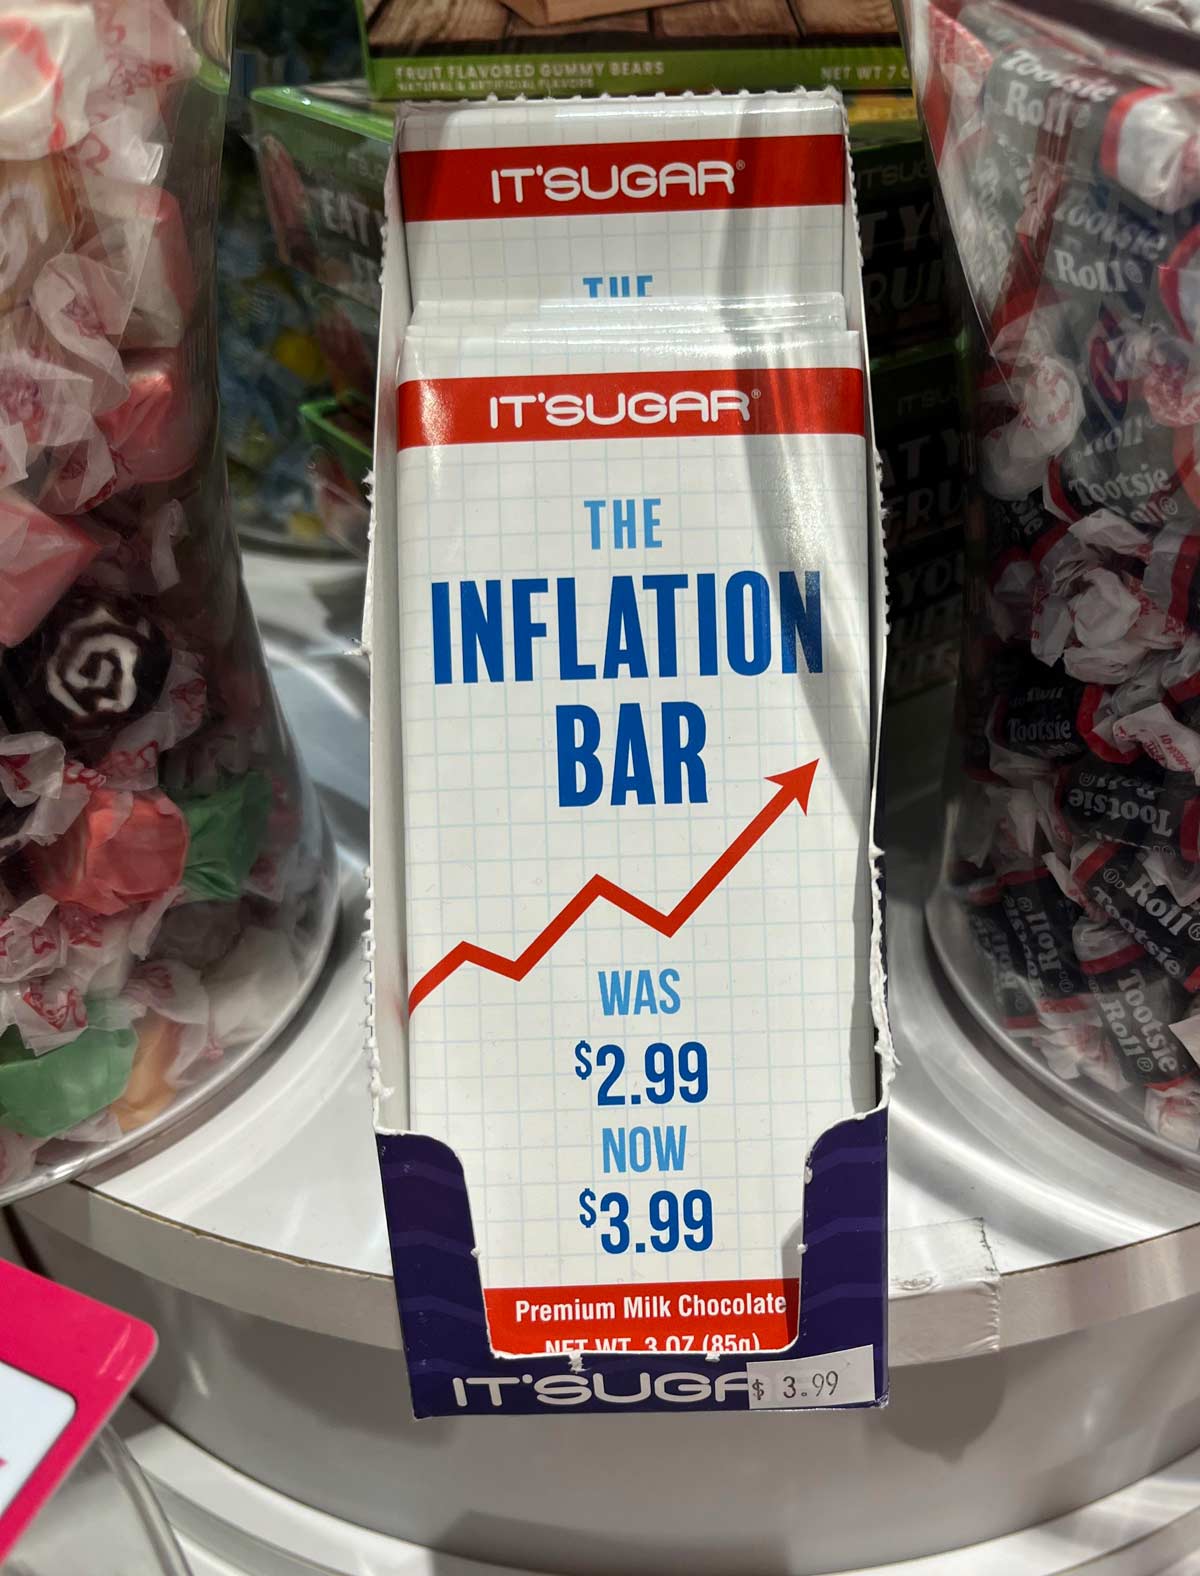 The Inflation Bar